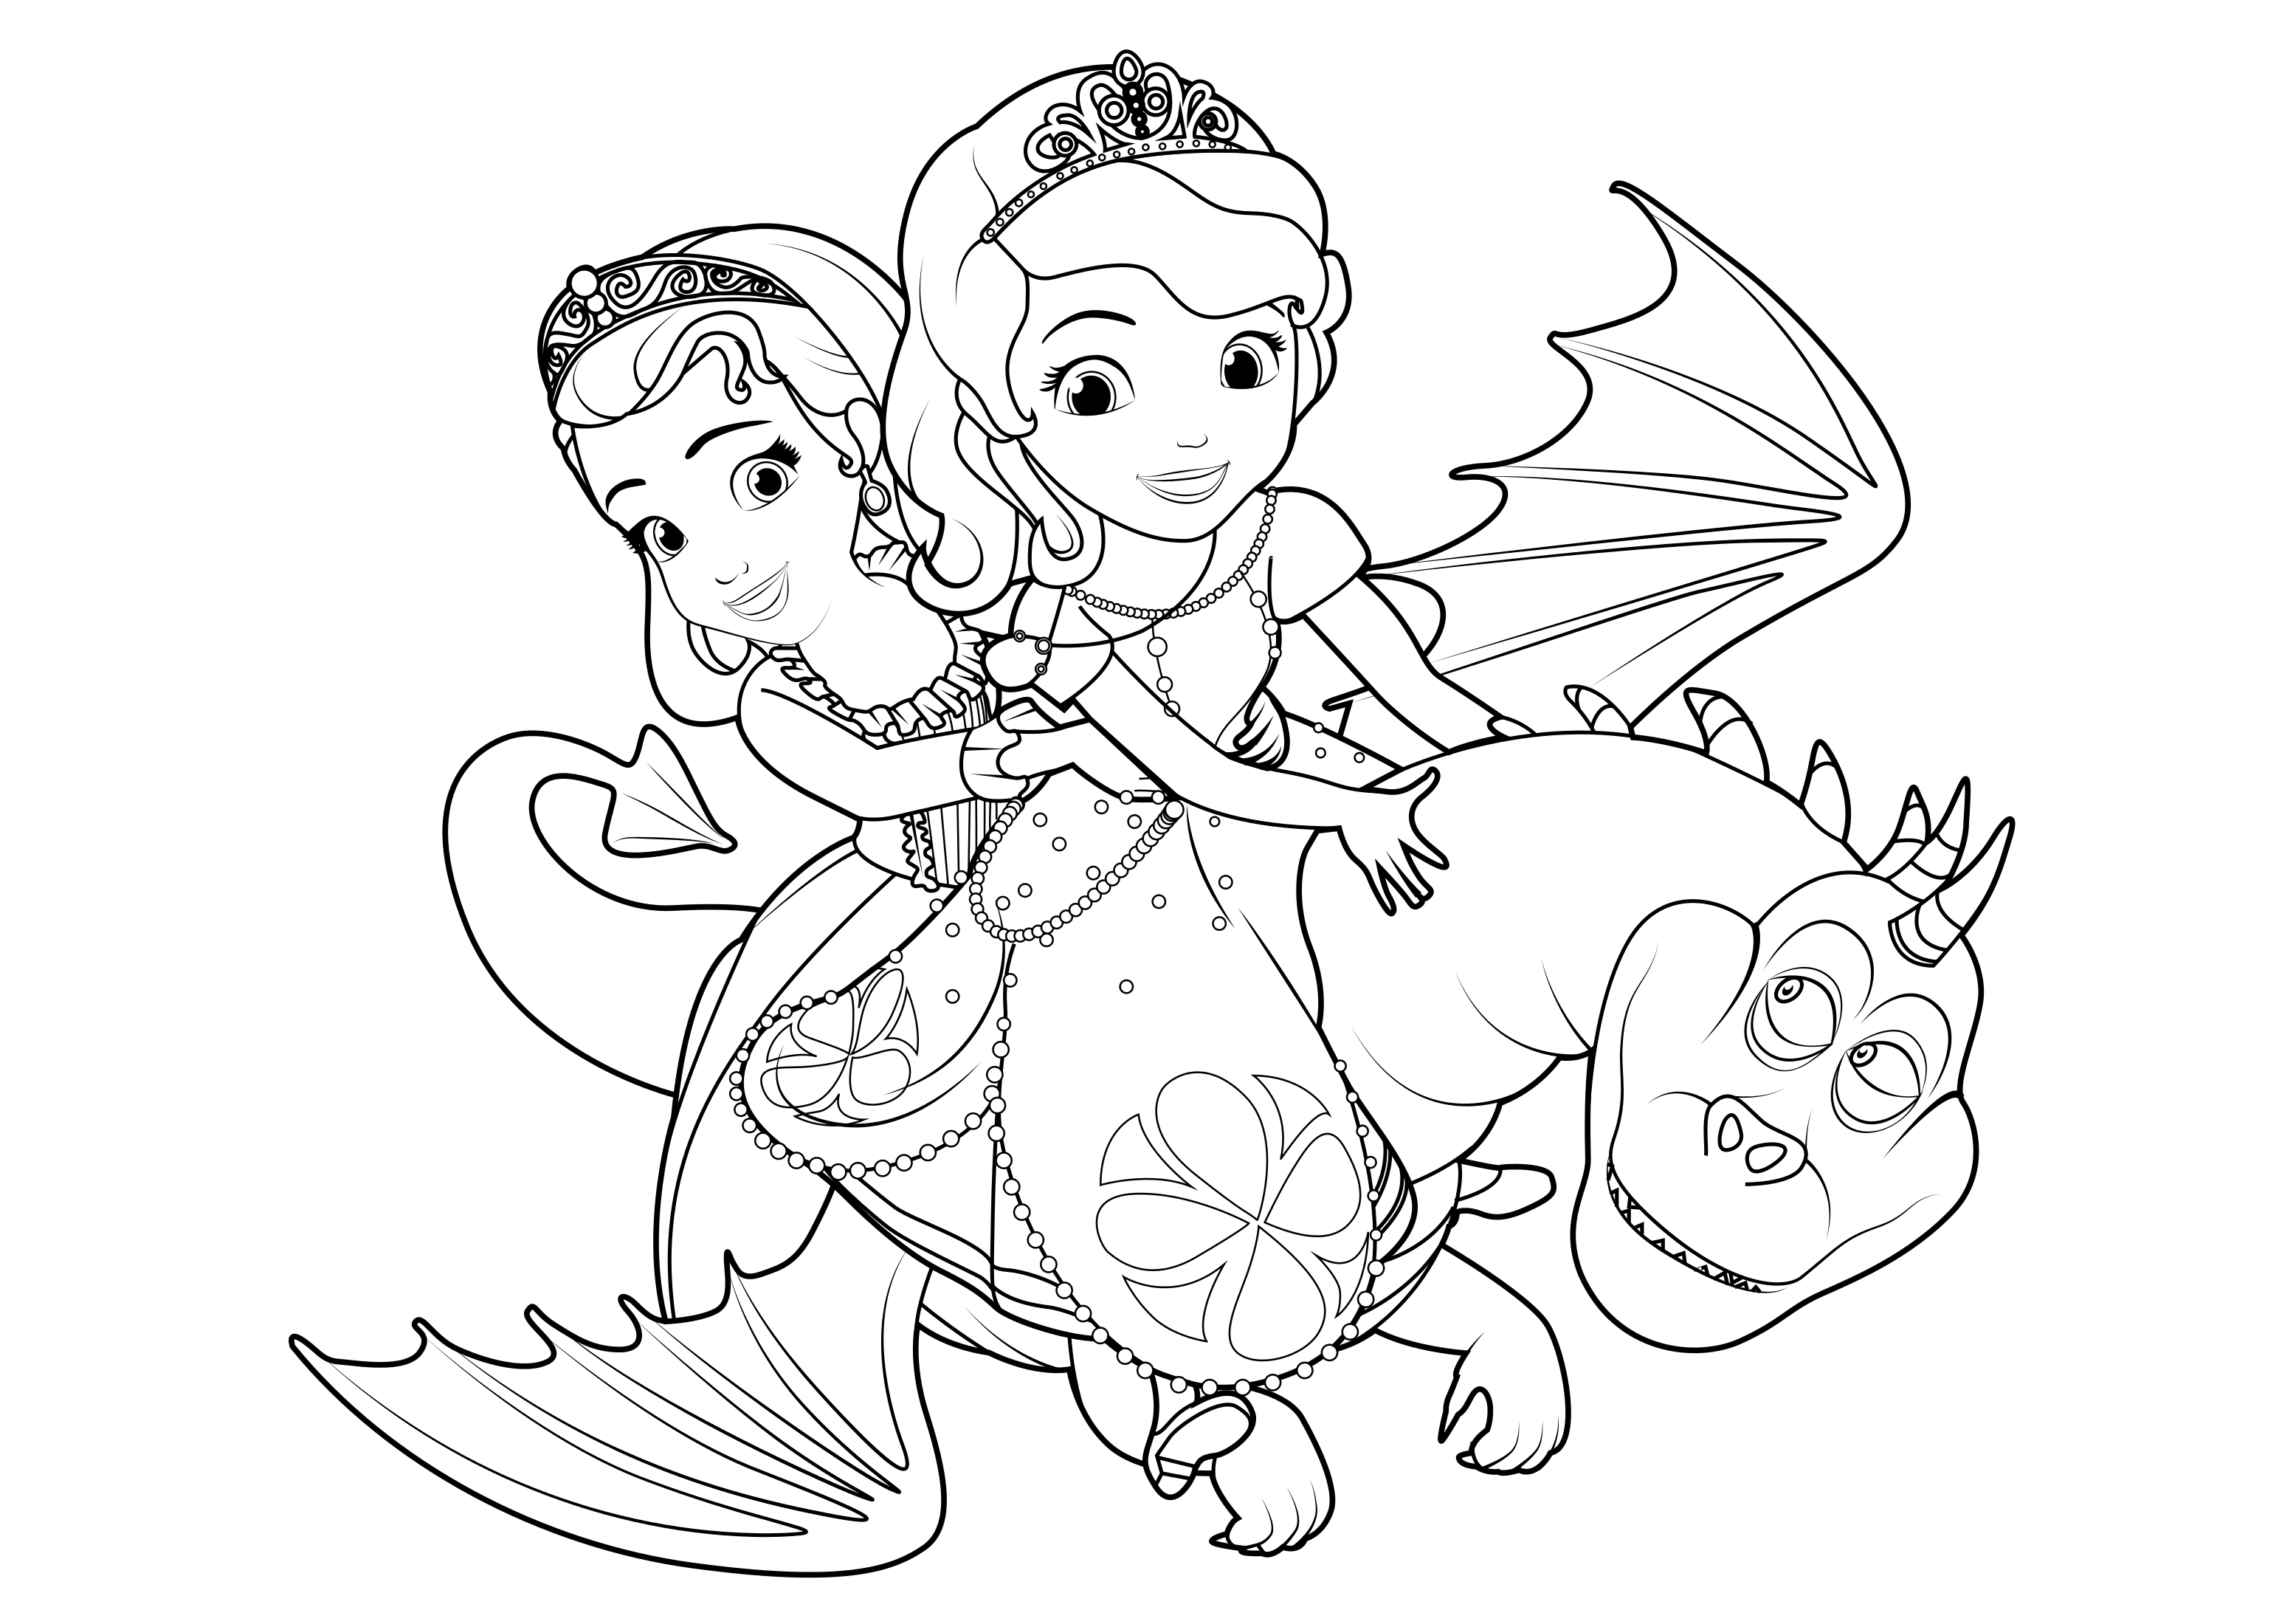 Coloring page Sofia the First Princesses Sofia and Amber on the dragon